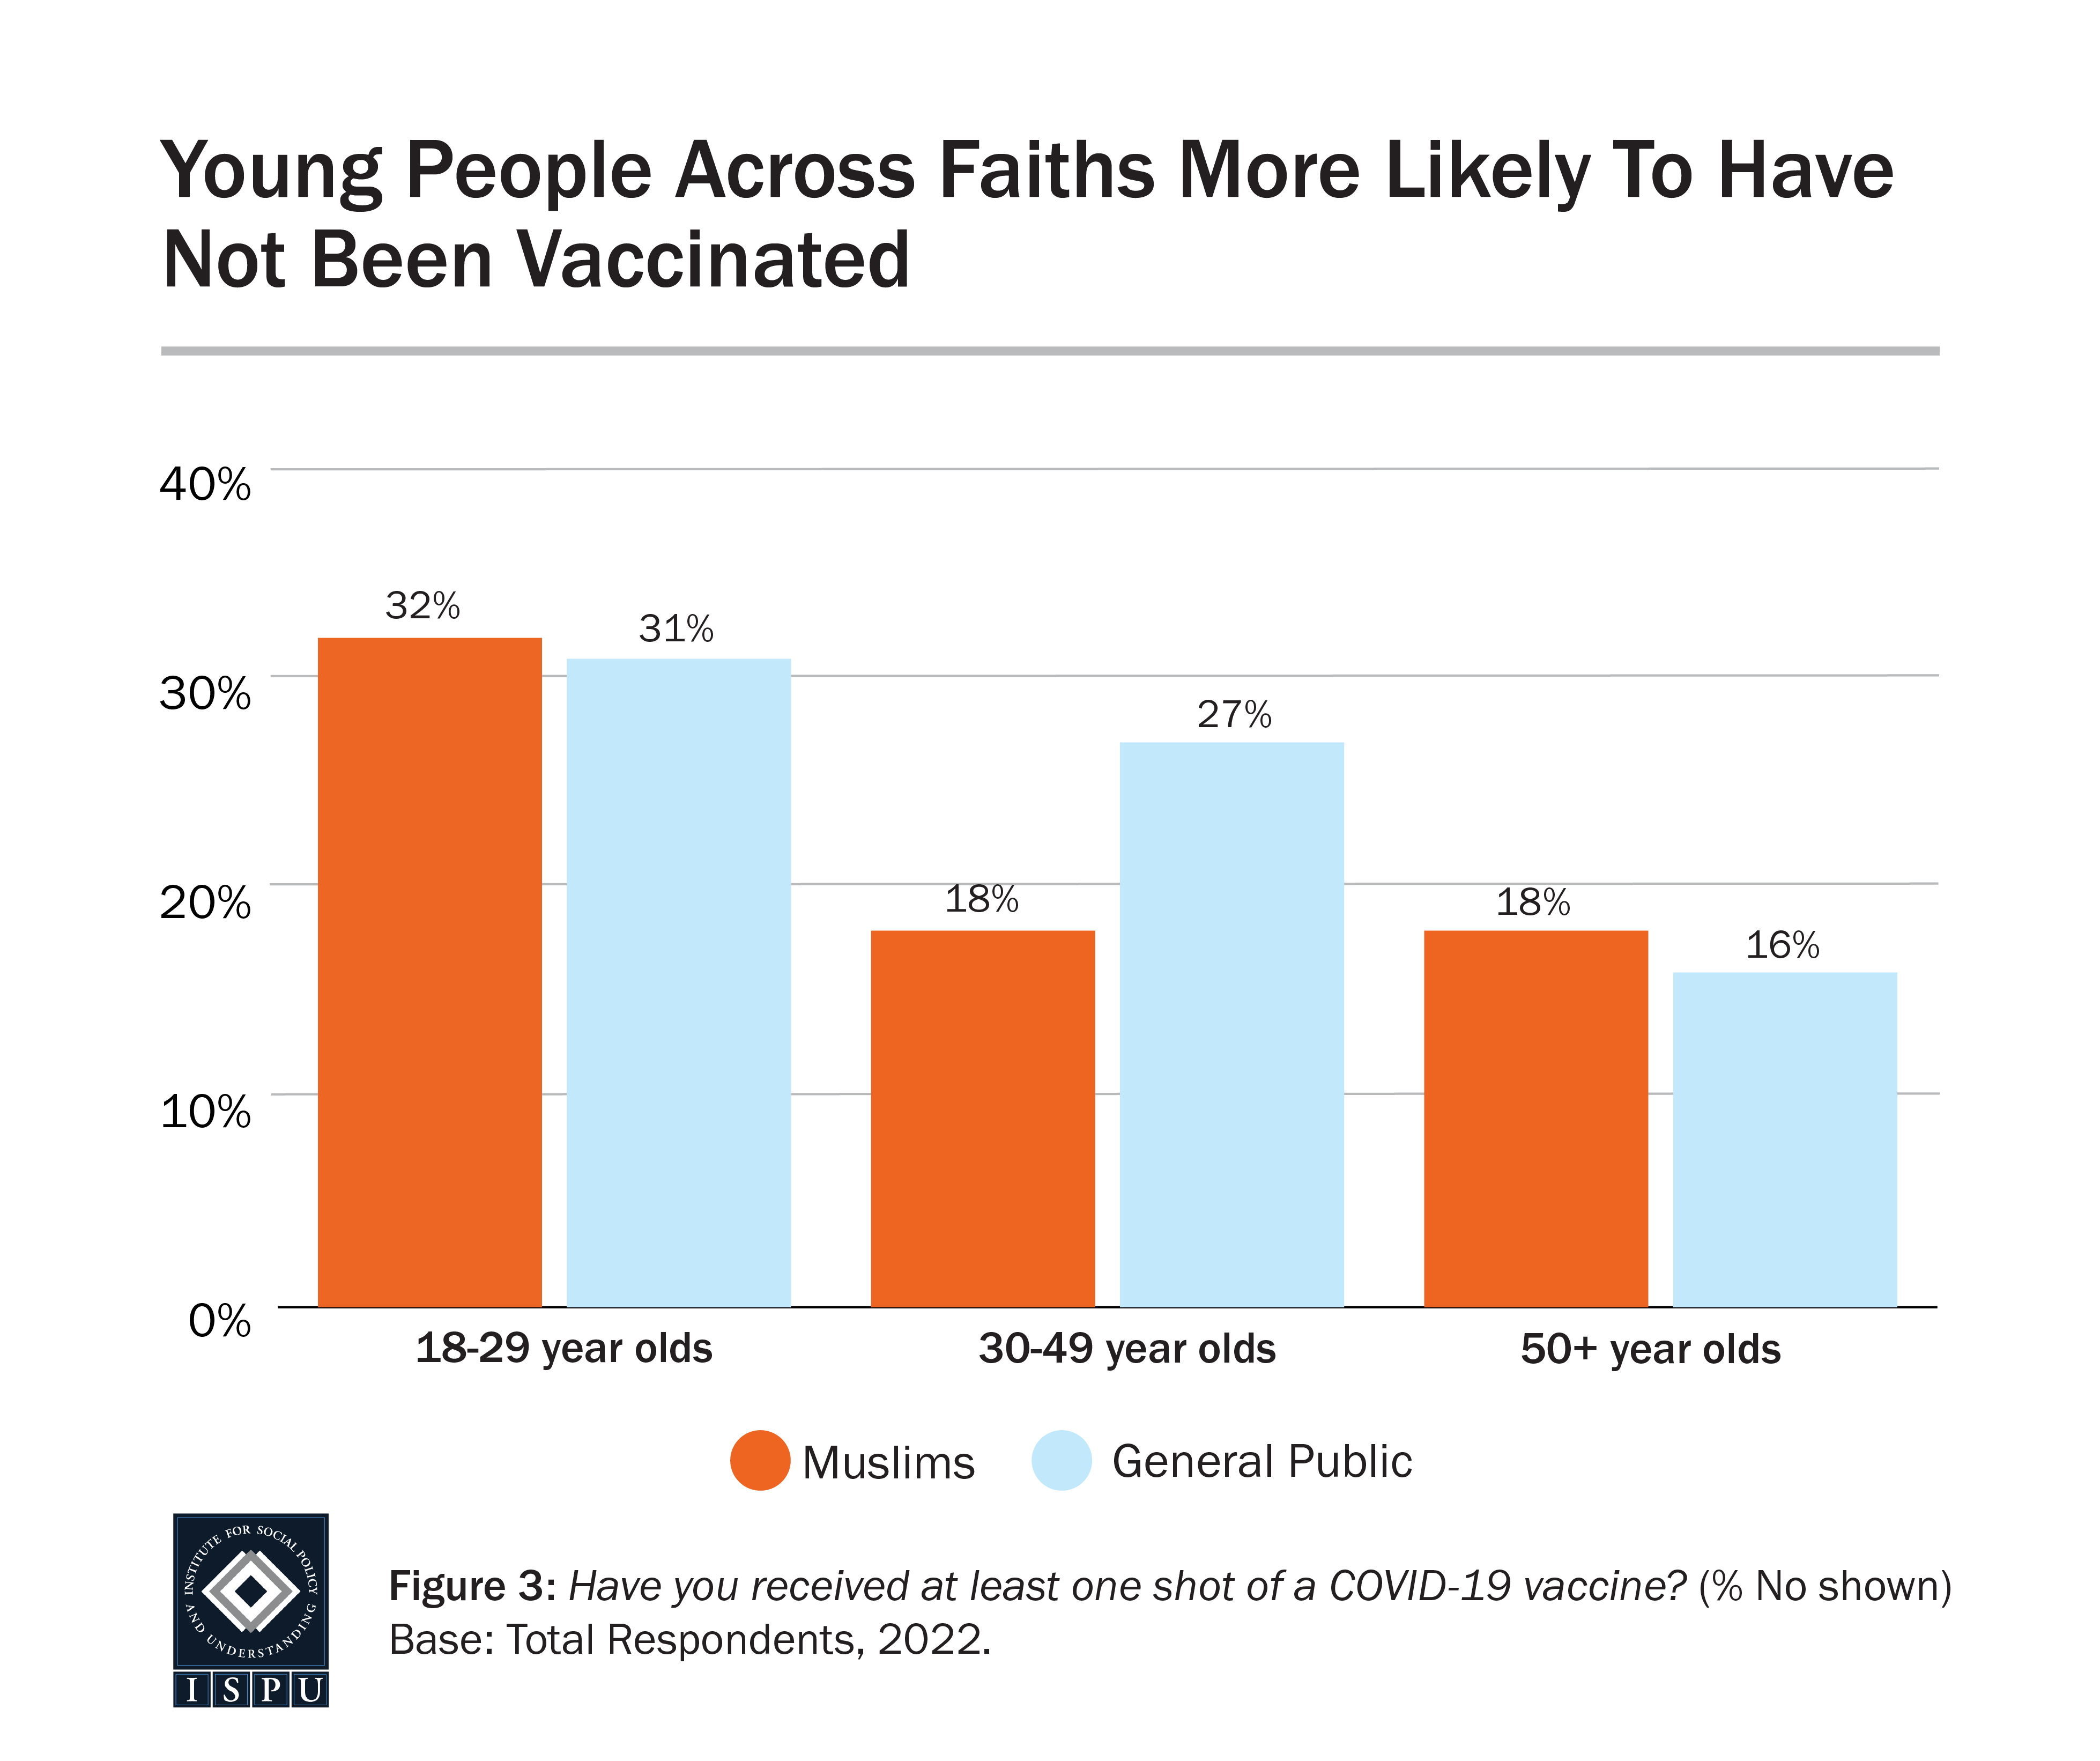 Bar graph showing that young people aged 18-29, among Muslims and the General Public, are more likely to report not being vaccinated.